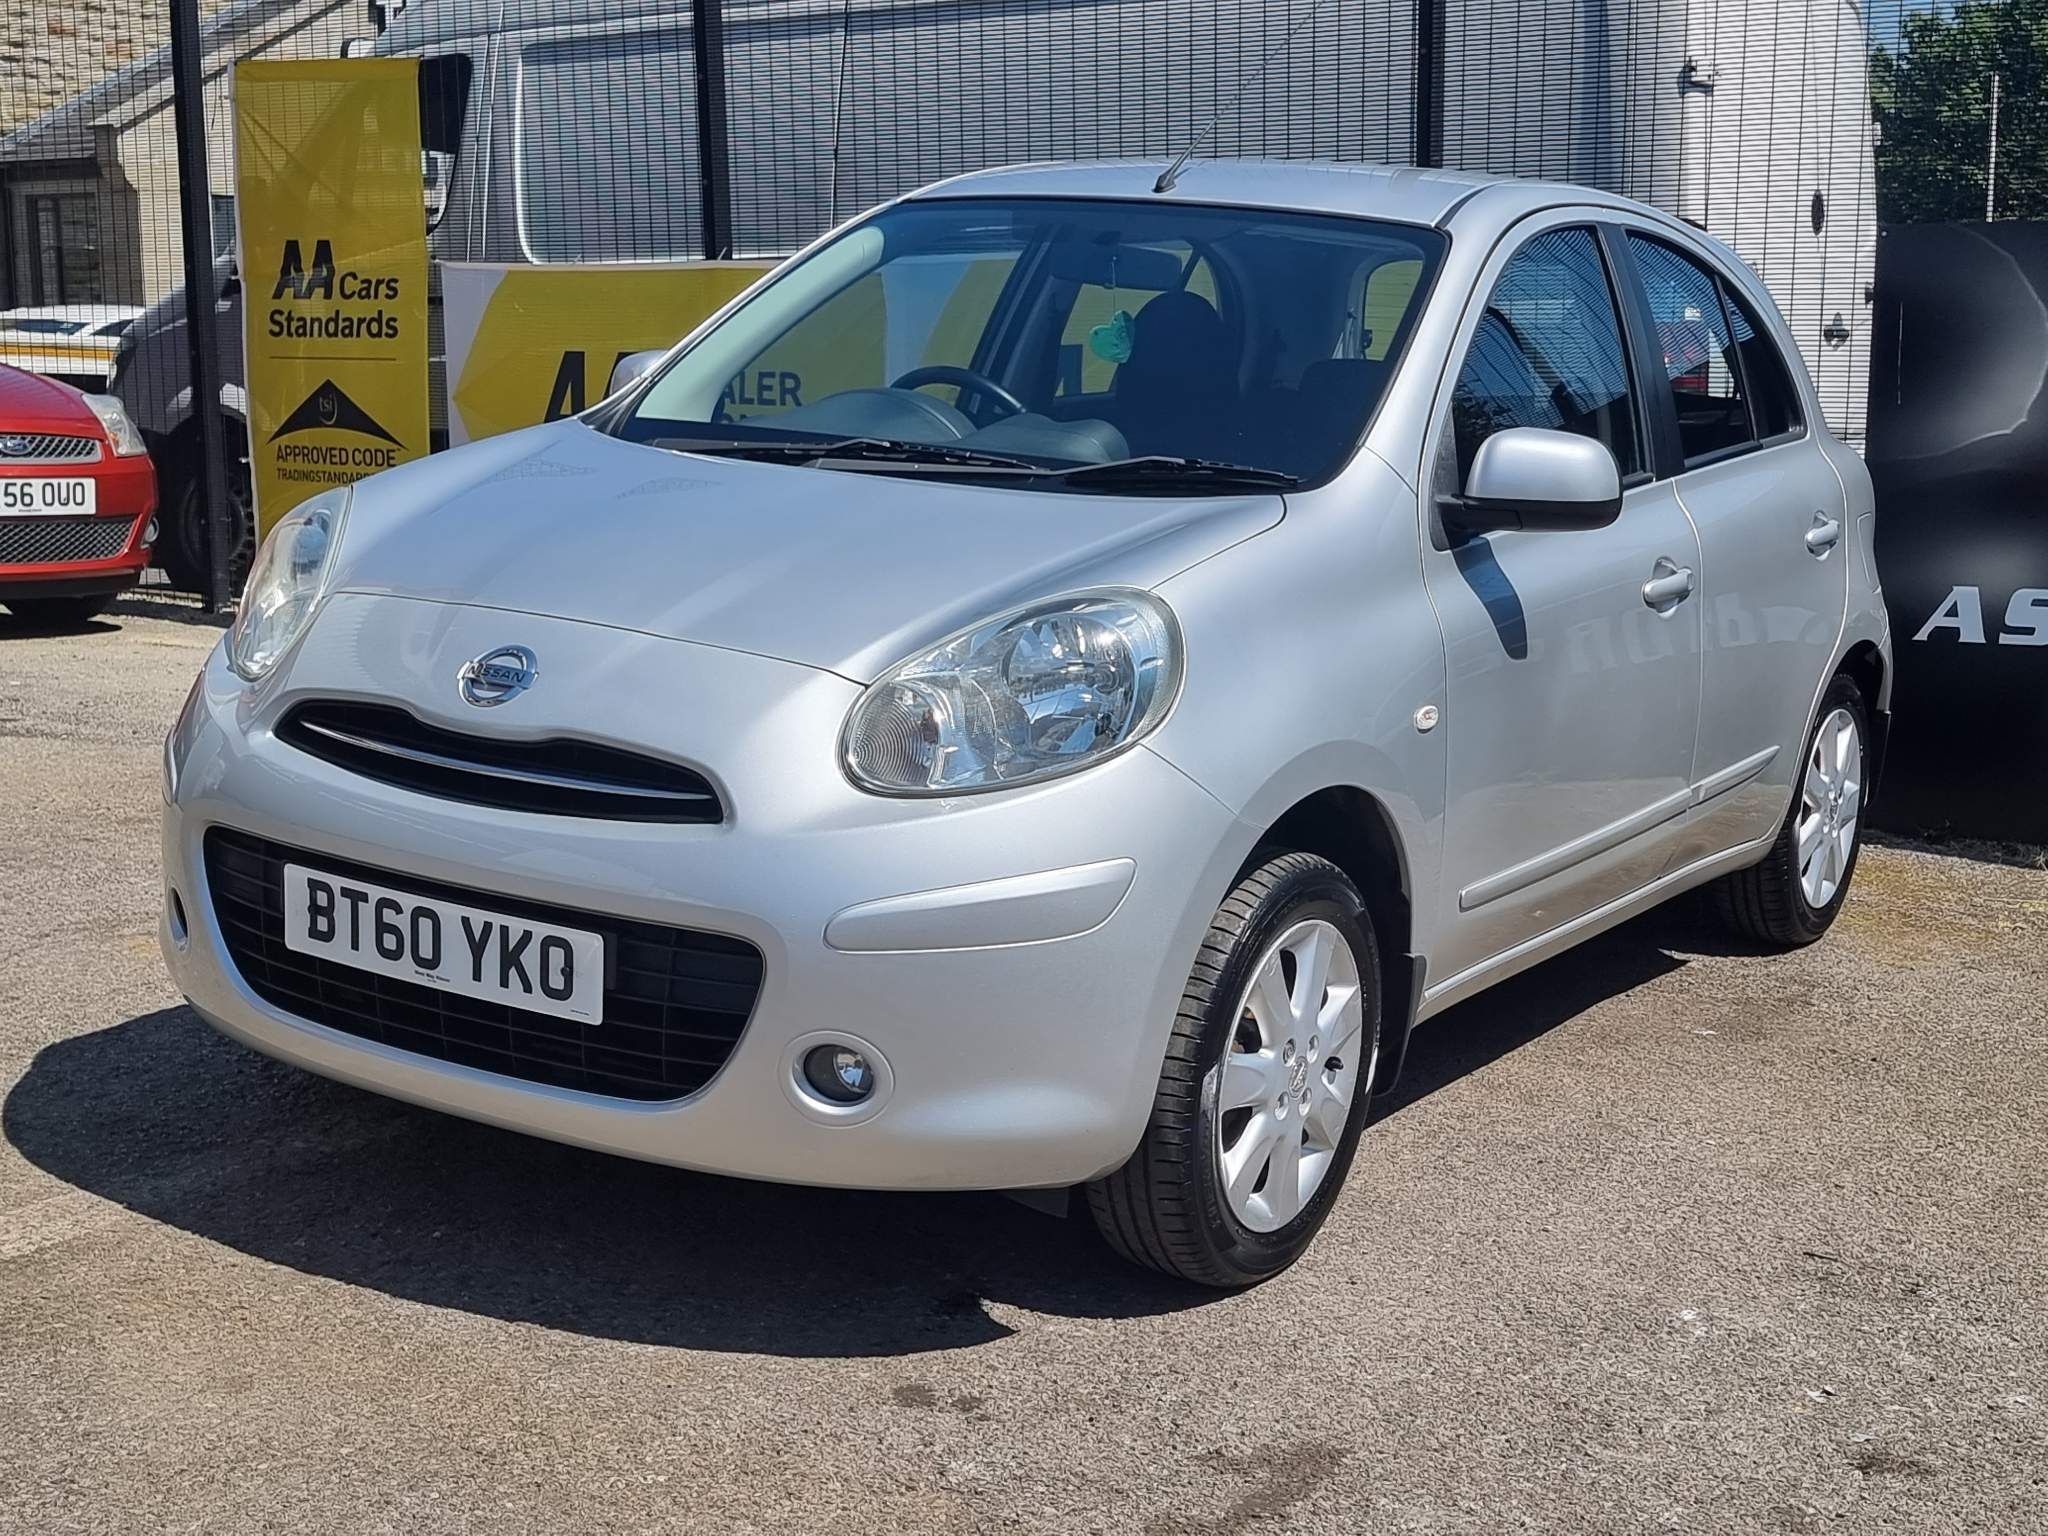 Used Nissan Micra Review - 2010-2016